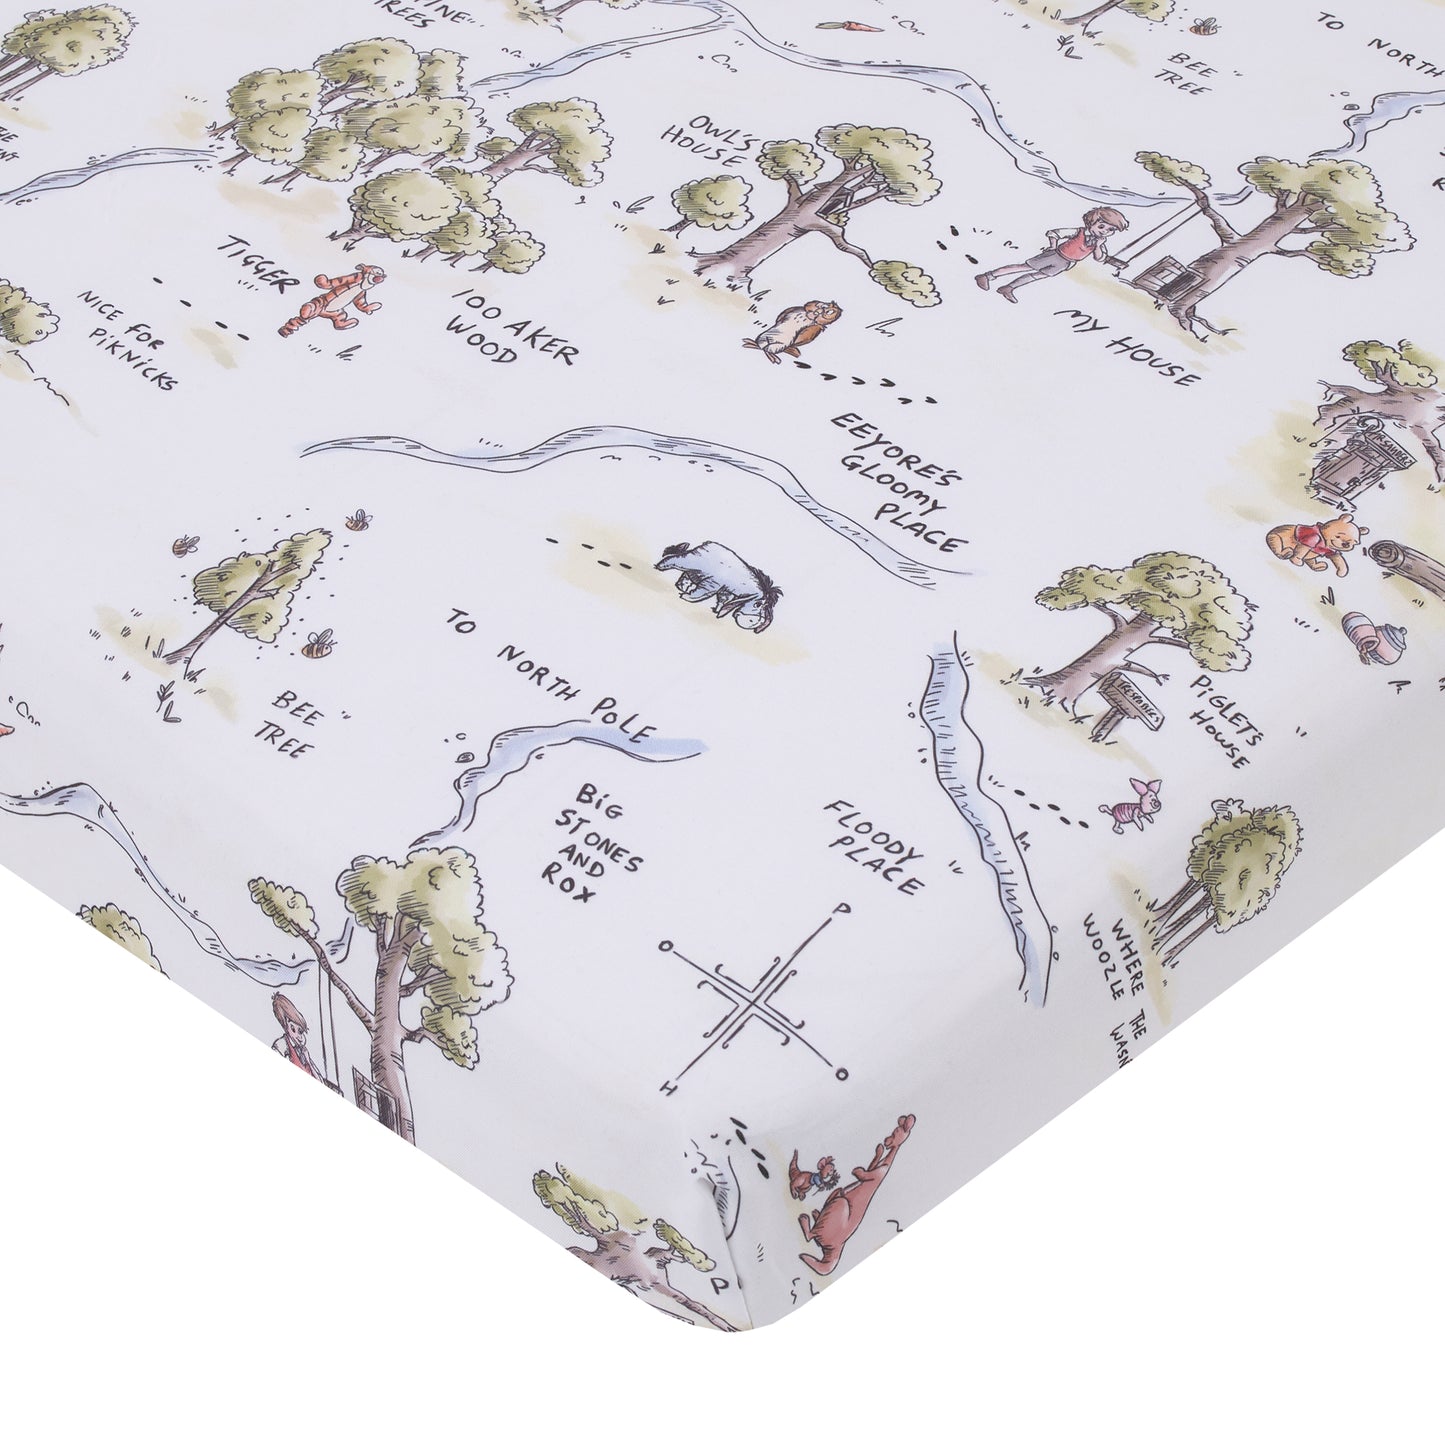 Disney Classic Winnie the Pooh Sage, Tan, and White, Map of 100 Acre Woods Super Soft Nursery Fitted Mini Crib Sheet